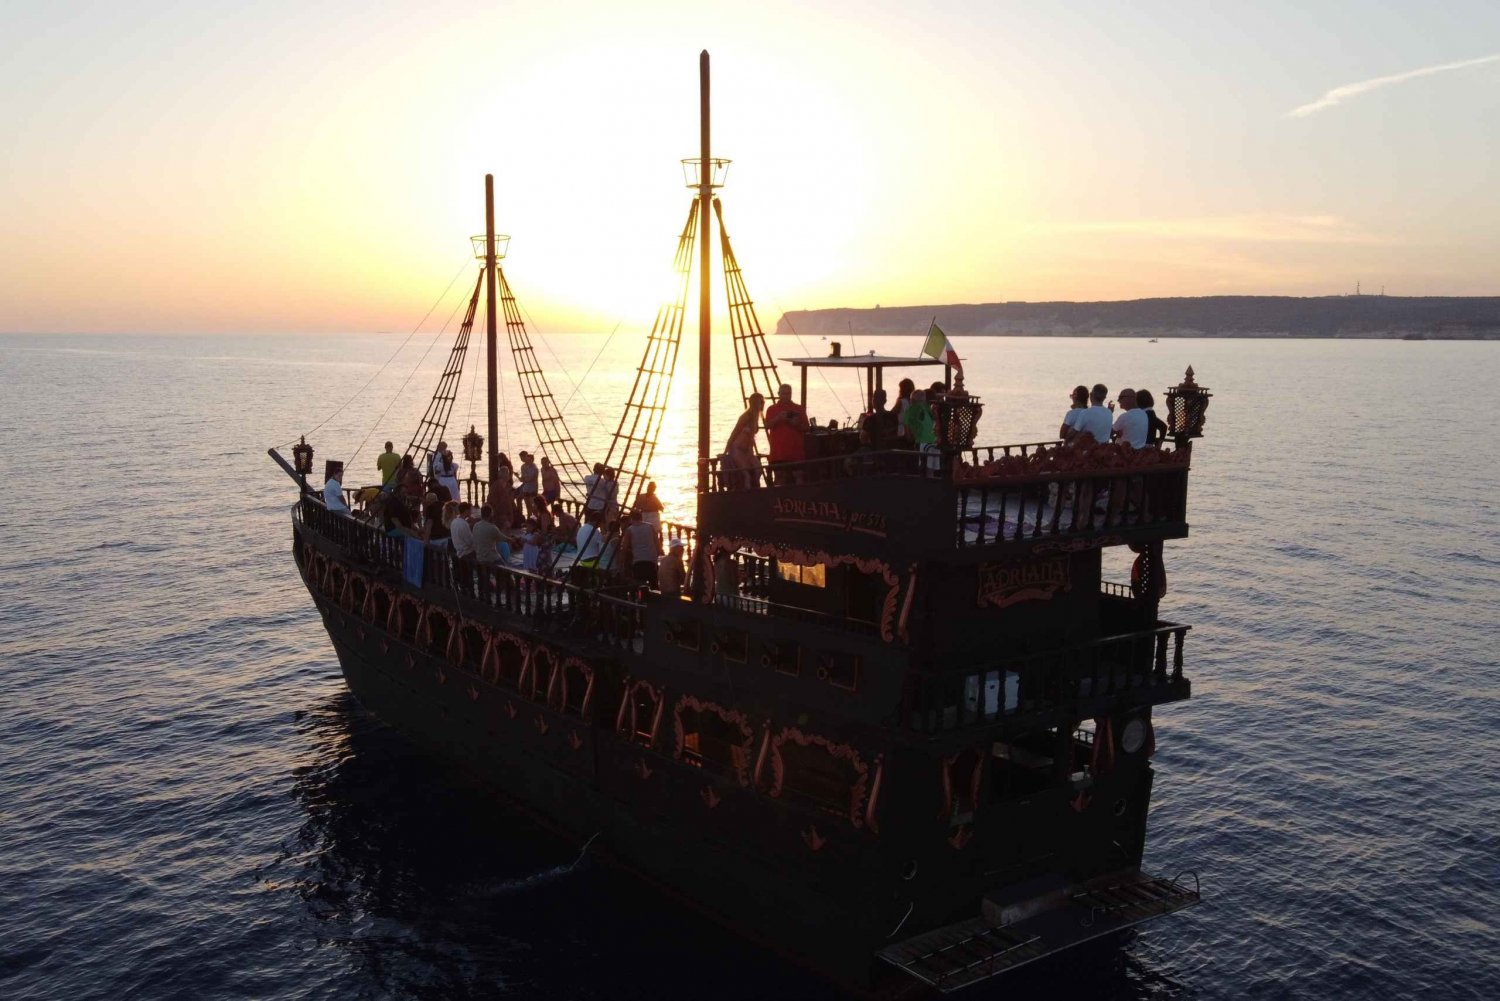 Lampedusa: Sunset Dolphin Sighting on a Pirate Ship